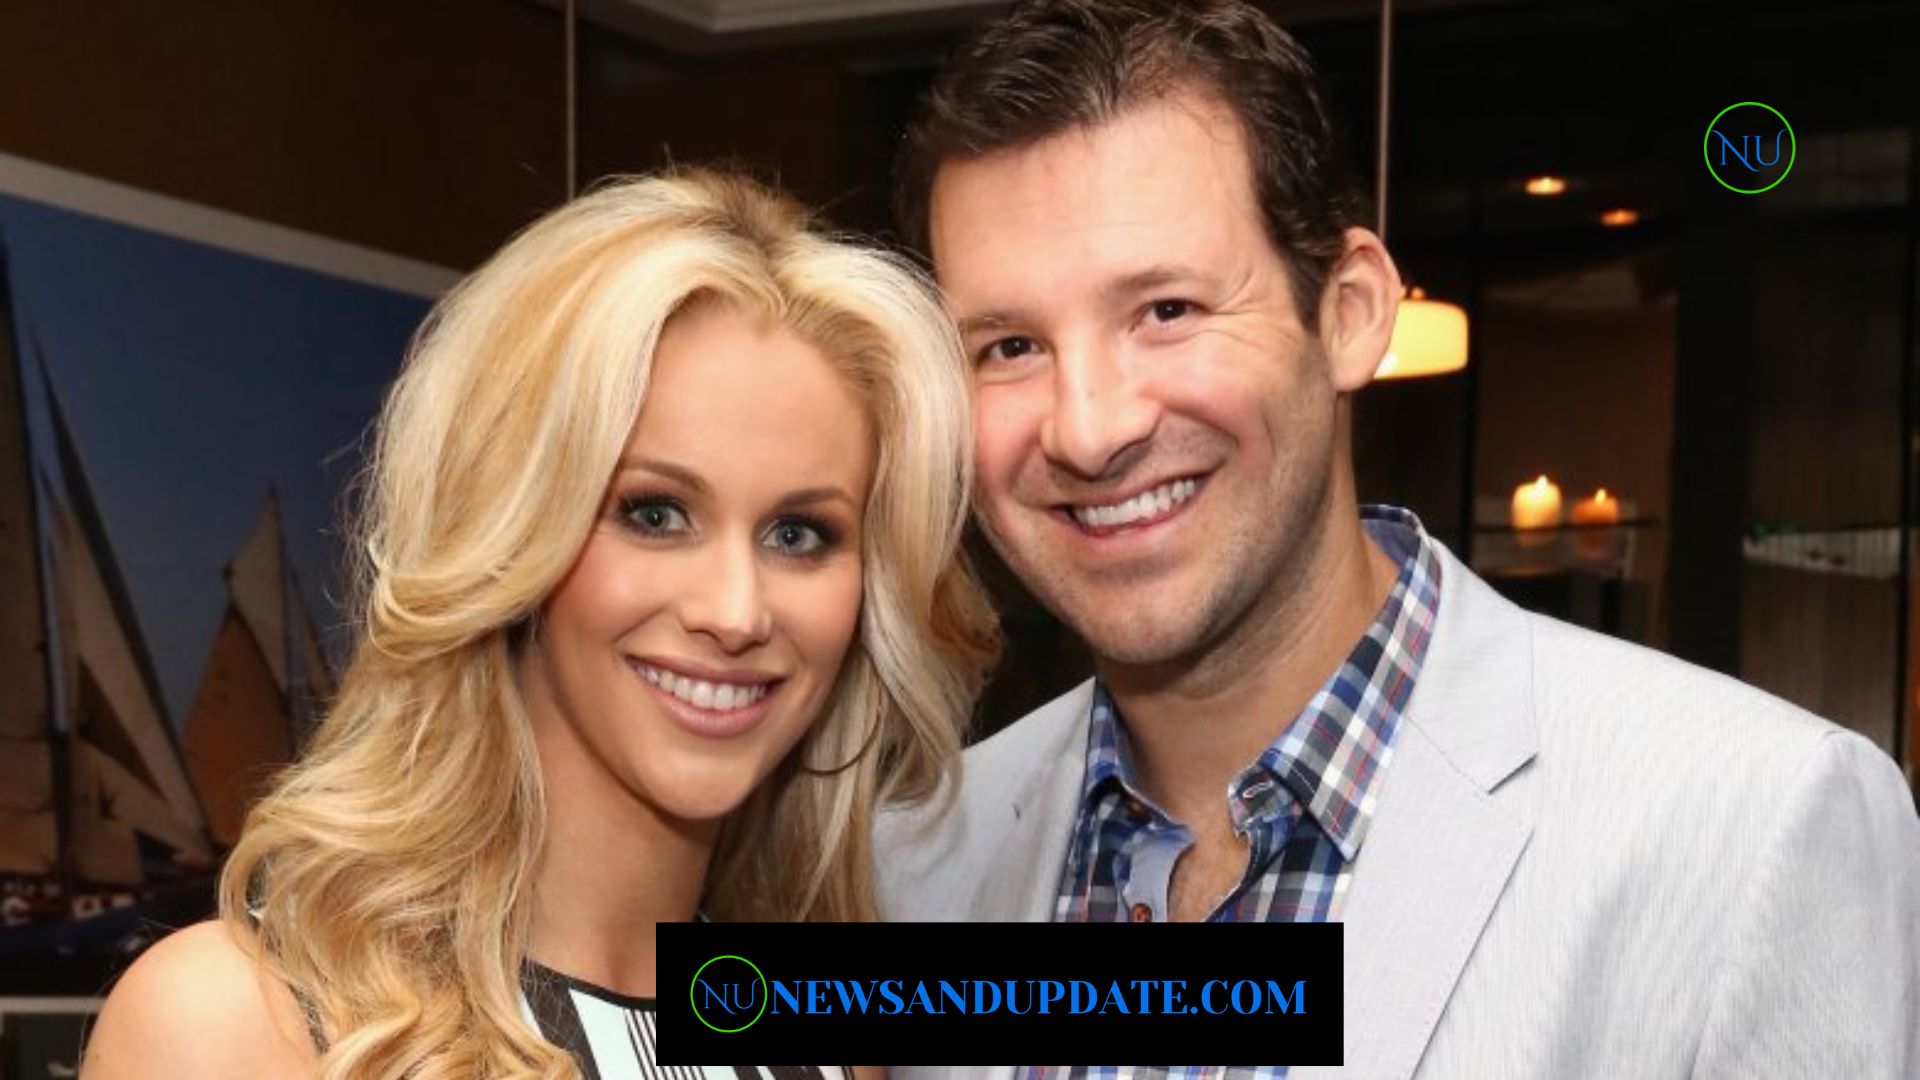 All You Need To Know About Tony Romo’s Divorce!